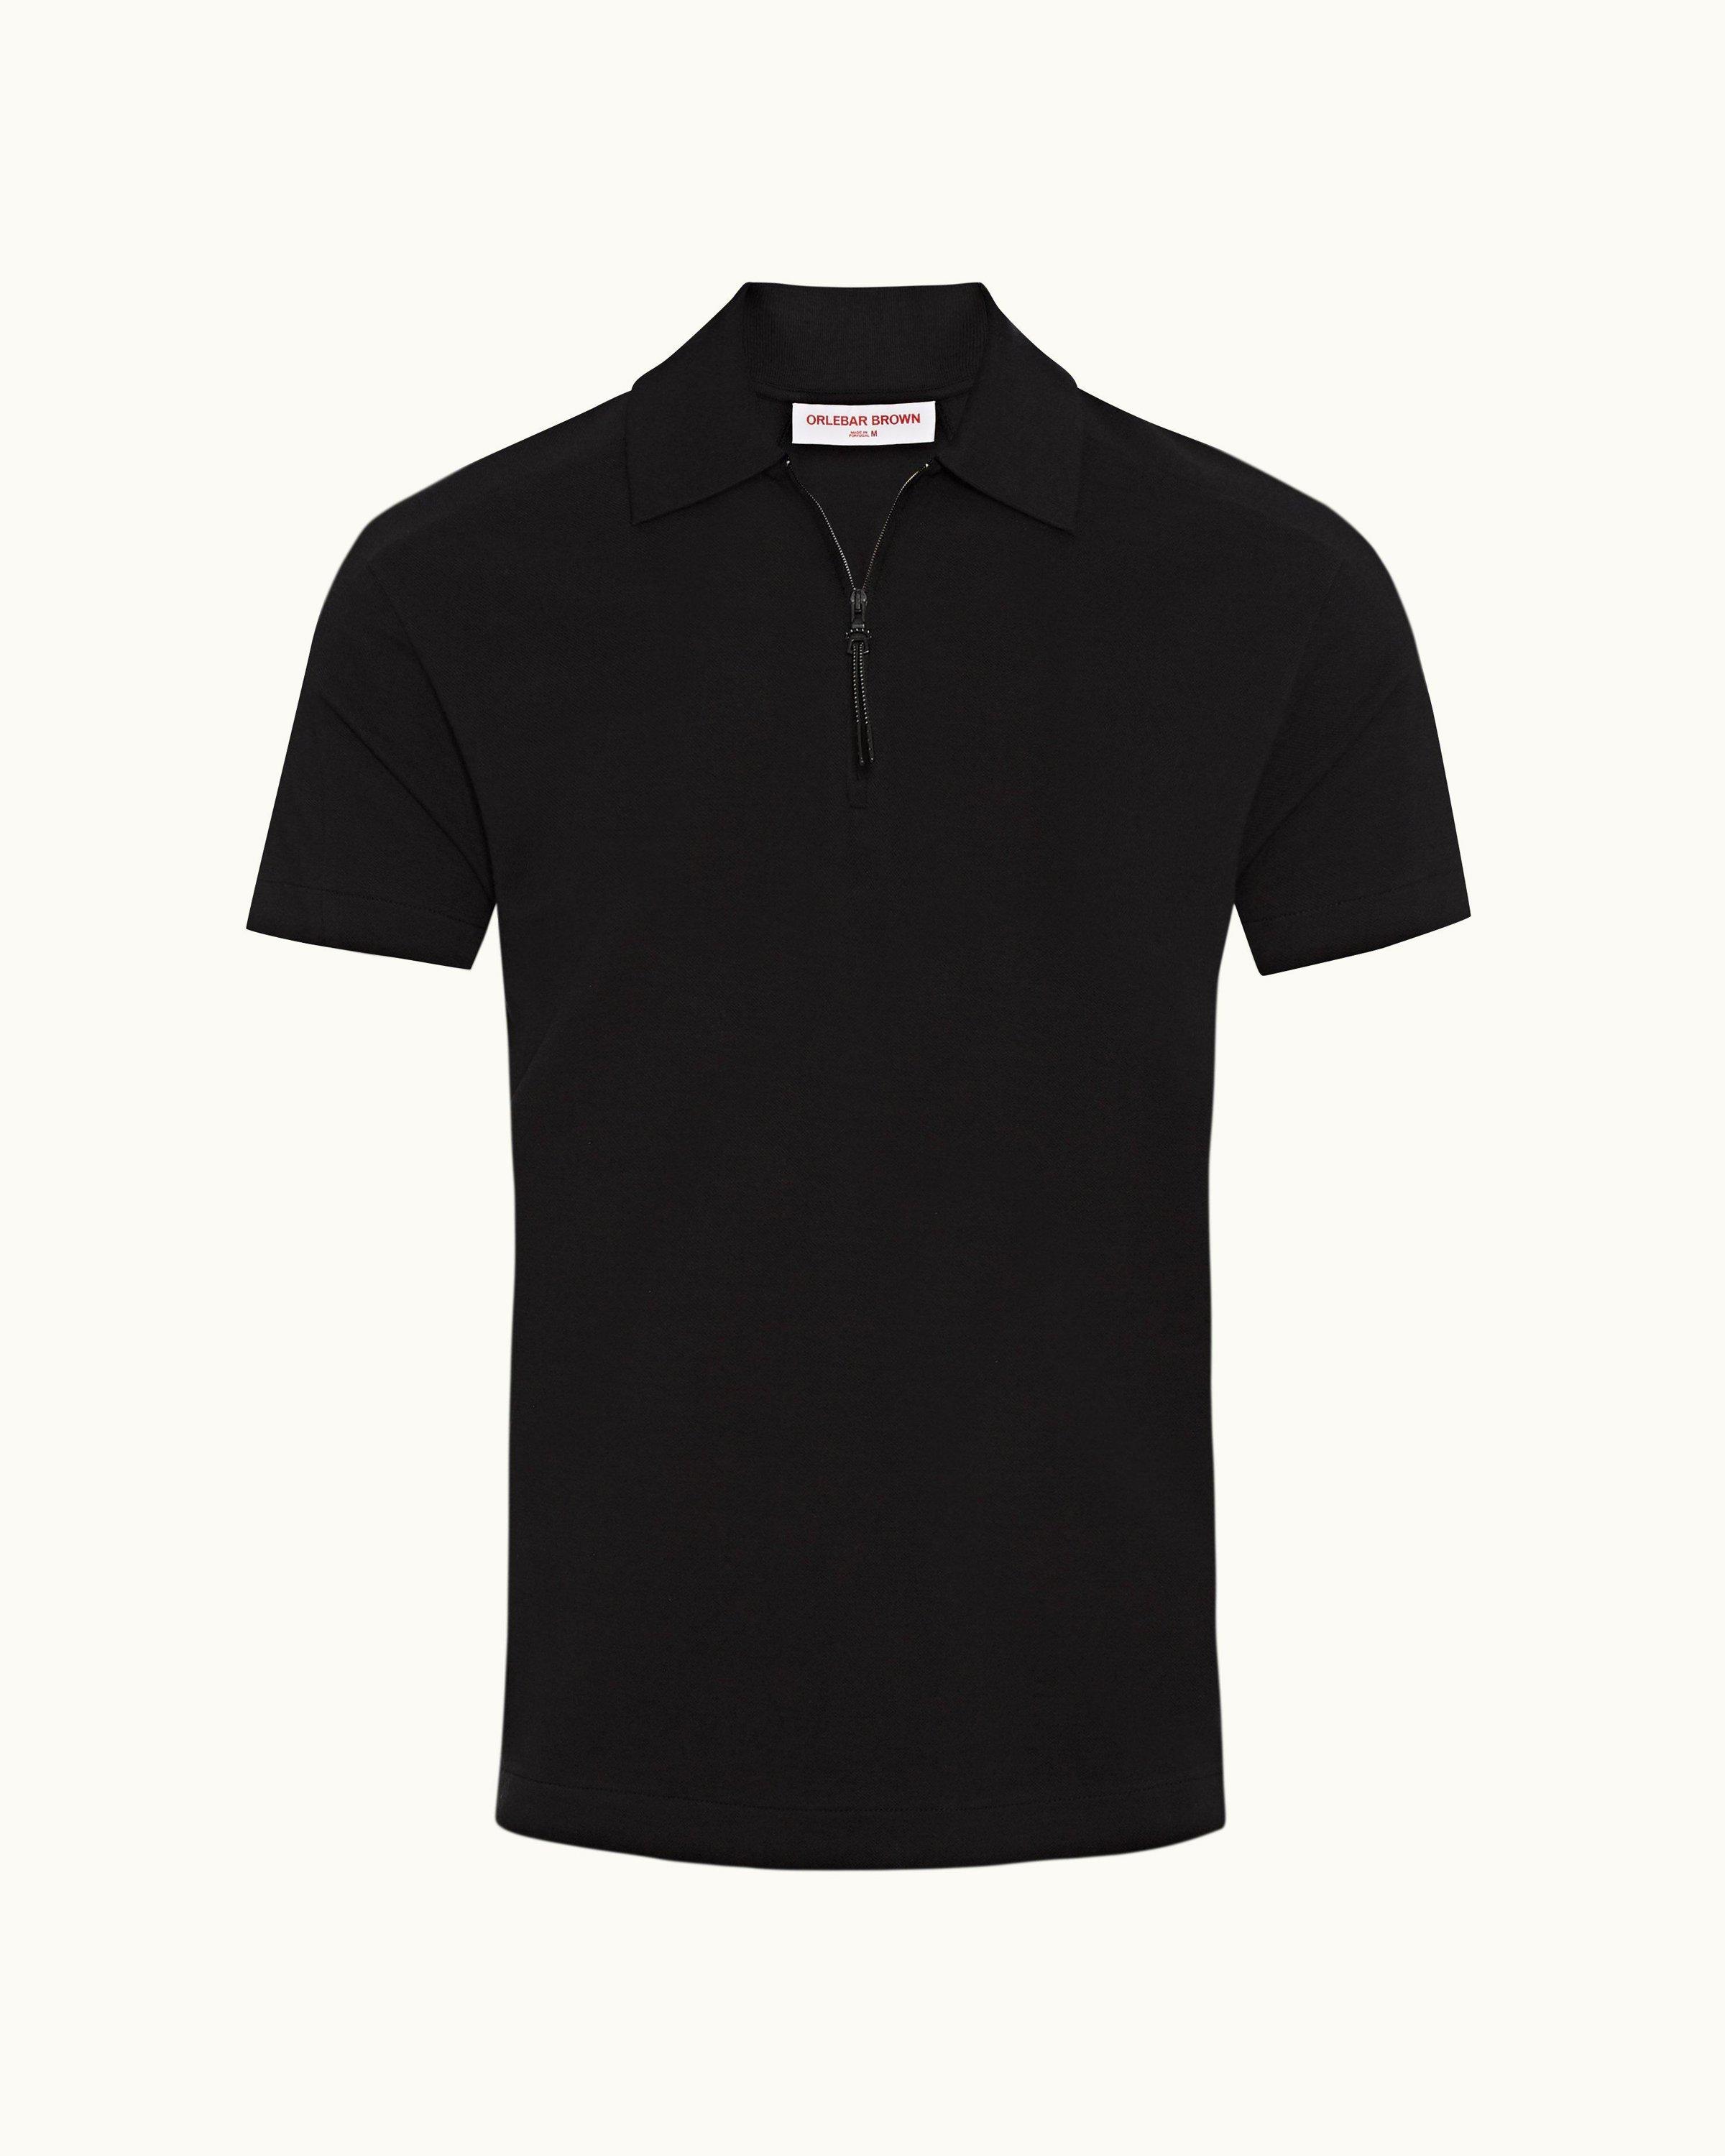 Orlebar Brown | Black Classic Fit Ice Wool Polo Shirt